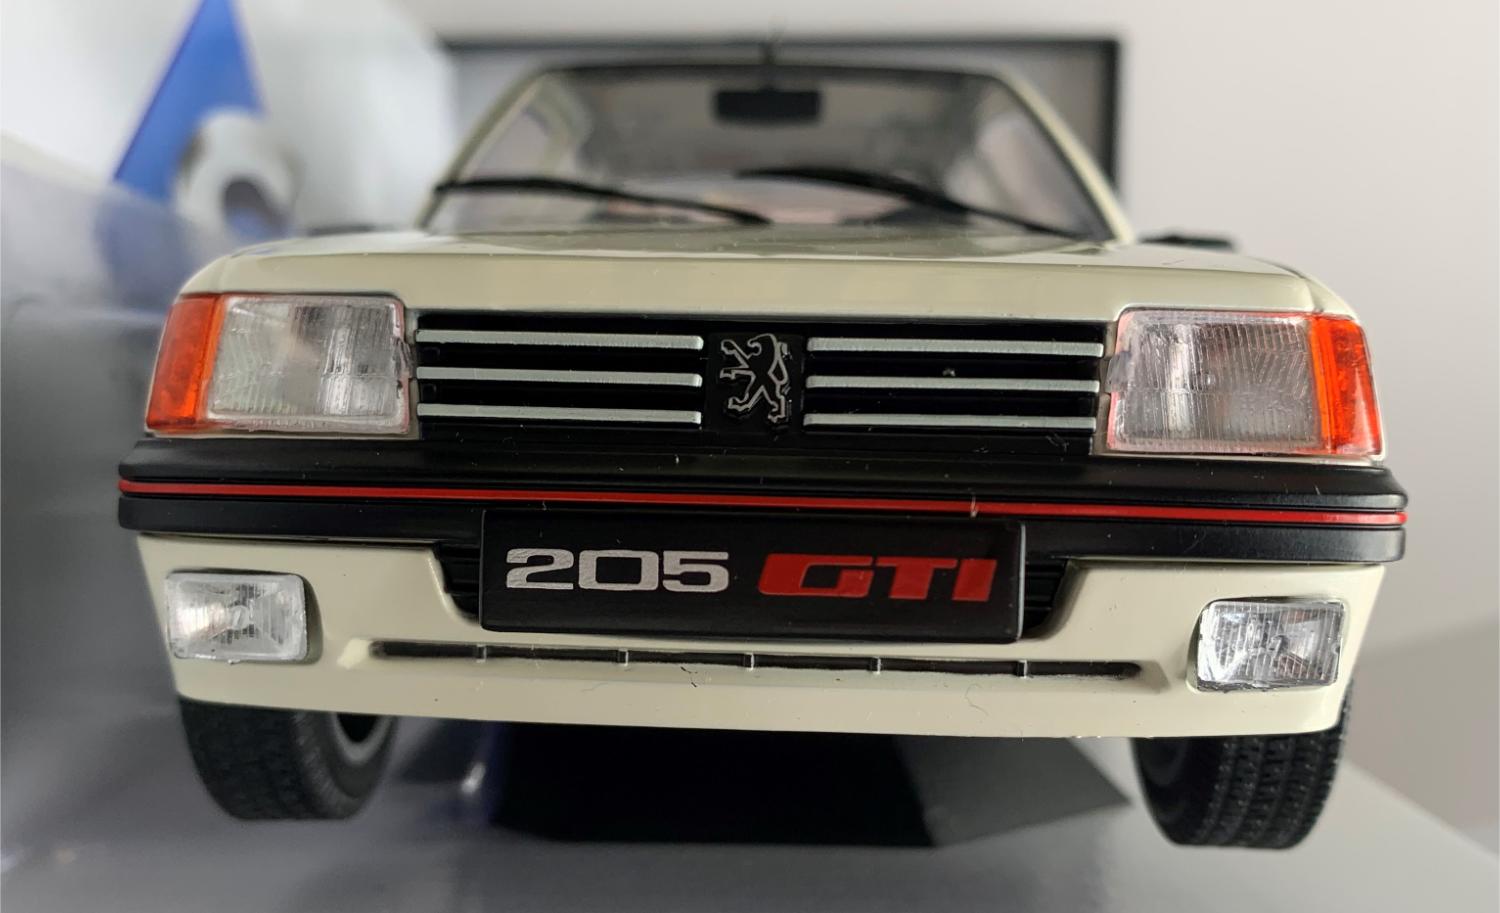 Peugeot 205 GTI 1.9L mk 1 1988 in white 1:18 scale model from Solido